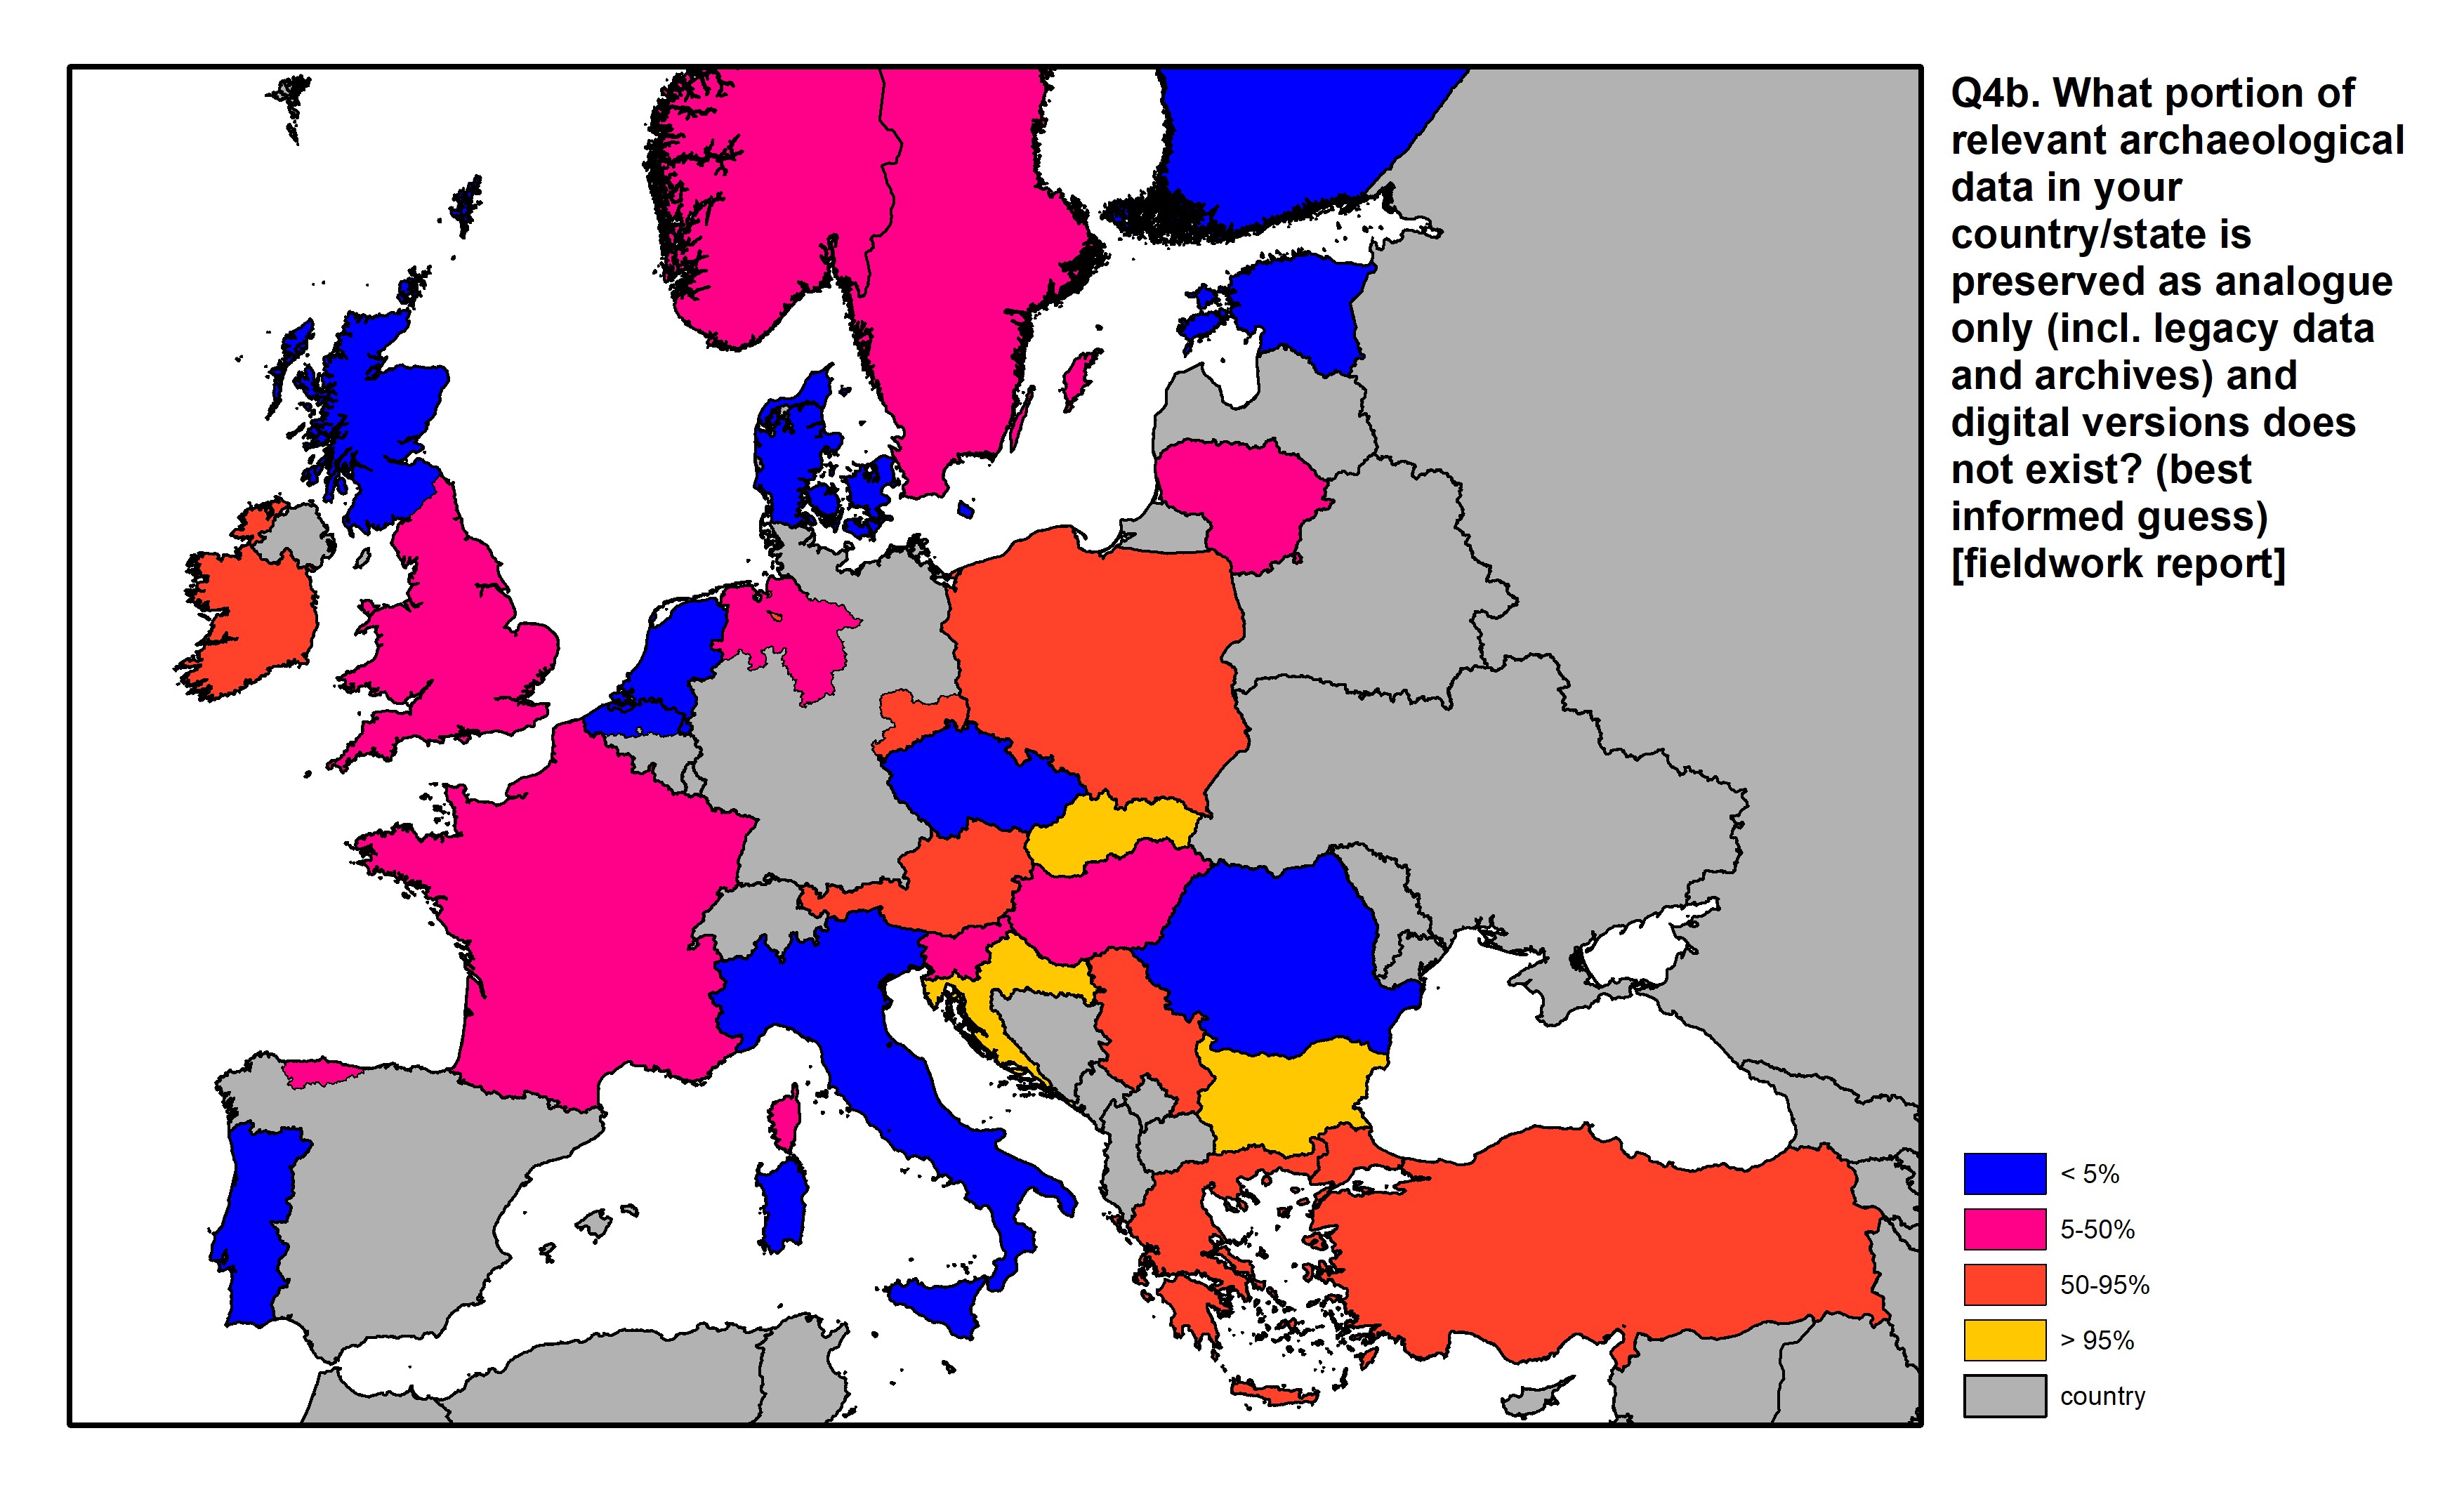 Figure 12: a map of Europe showing countries and regions in colour based on response rates to the survey question.